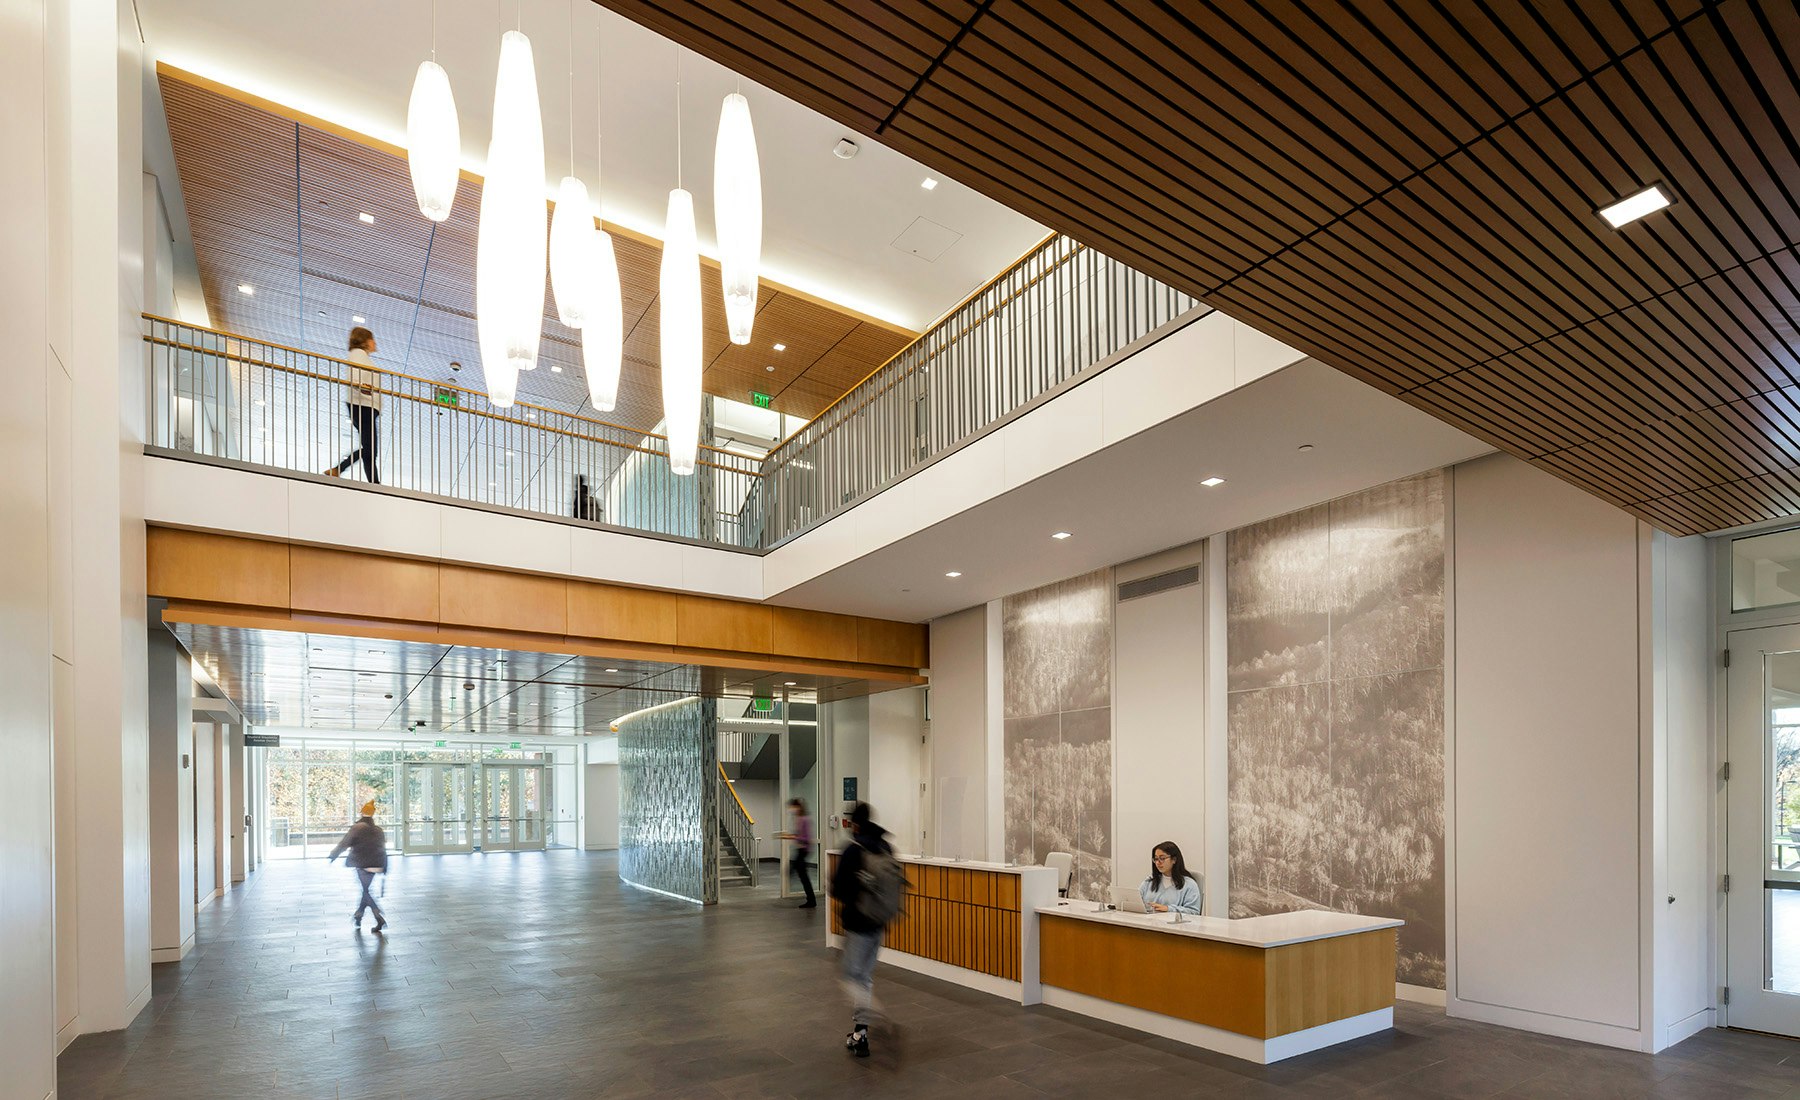 Student Health and Wellness Center, Lobby: The entire building is organized around an open and light-filled entry and multi-story lobby, while generous windows invite daylight into all departments, improving orientation and wayfinding.